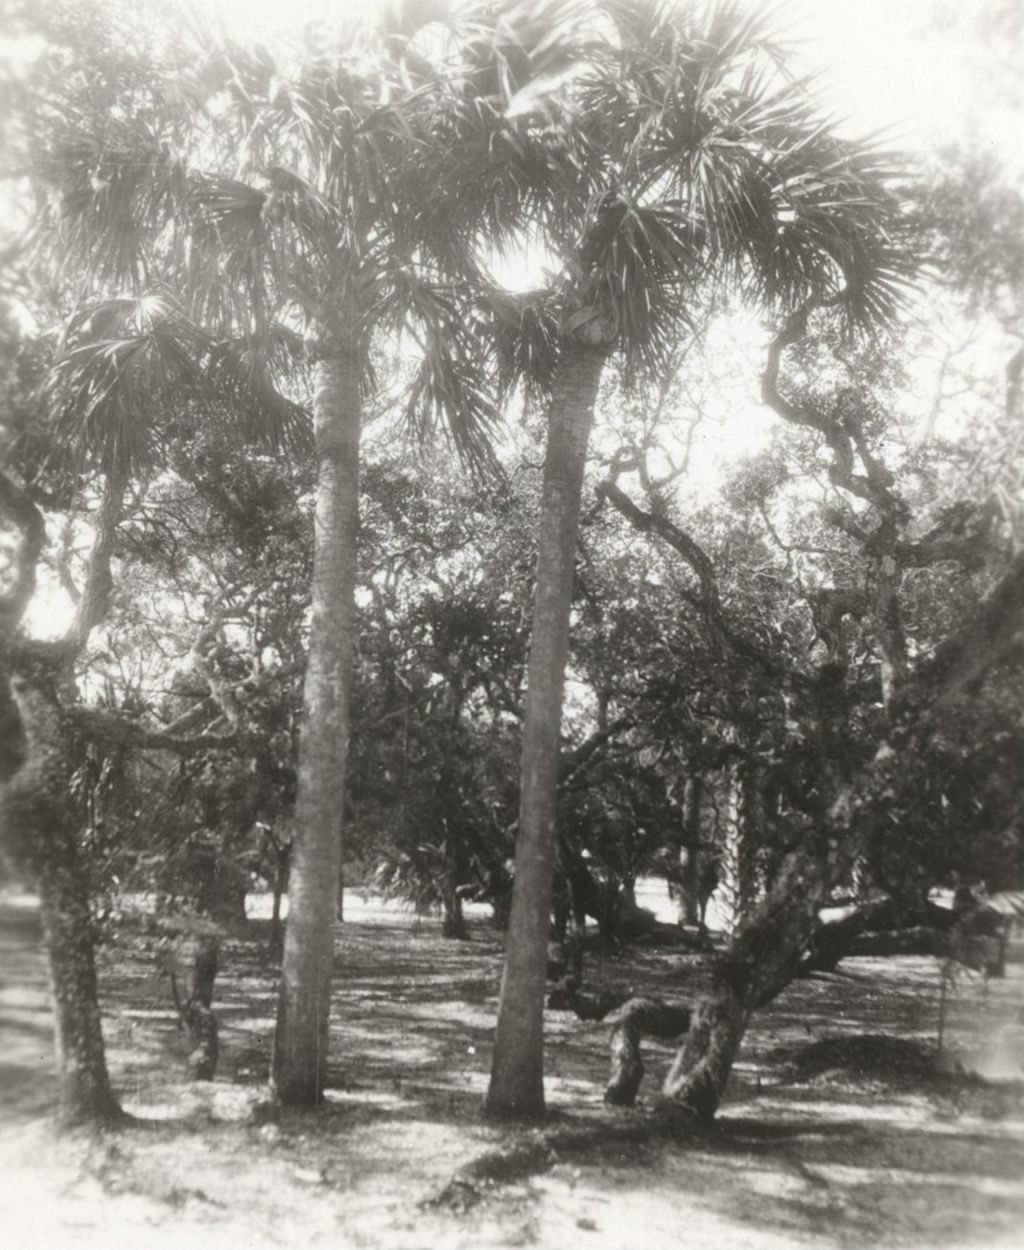 Palm trees photographed on Jane Addams' trip to Mexico